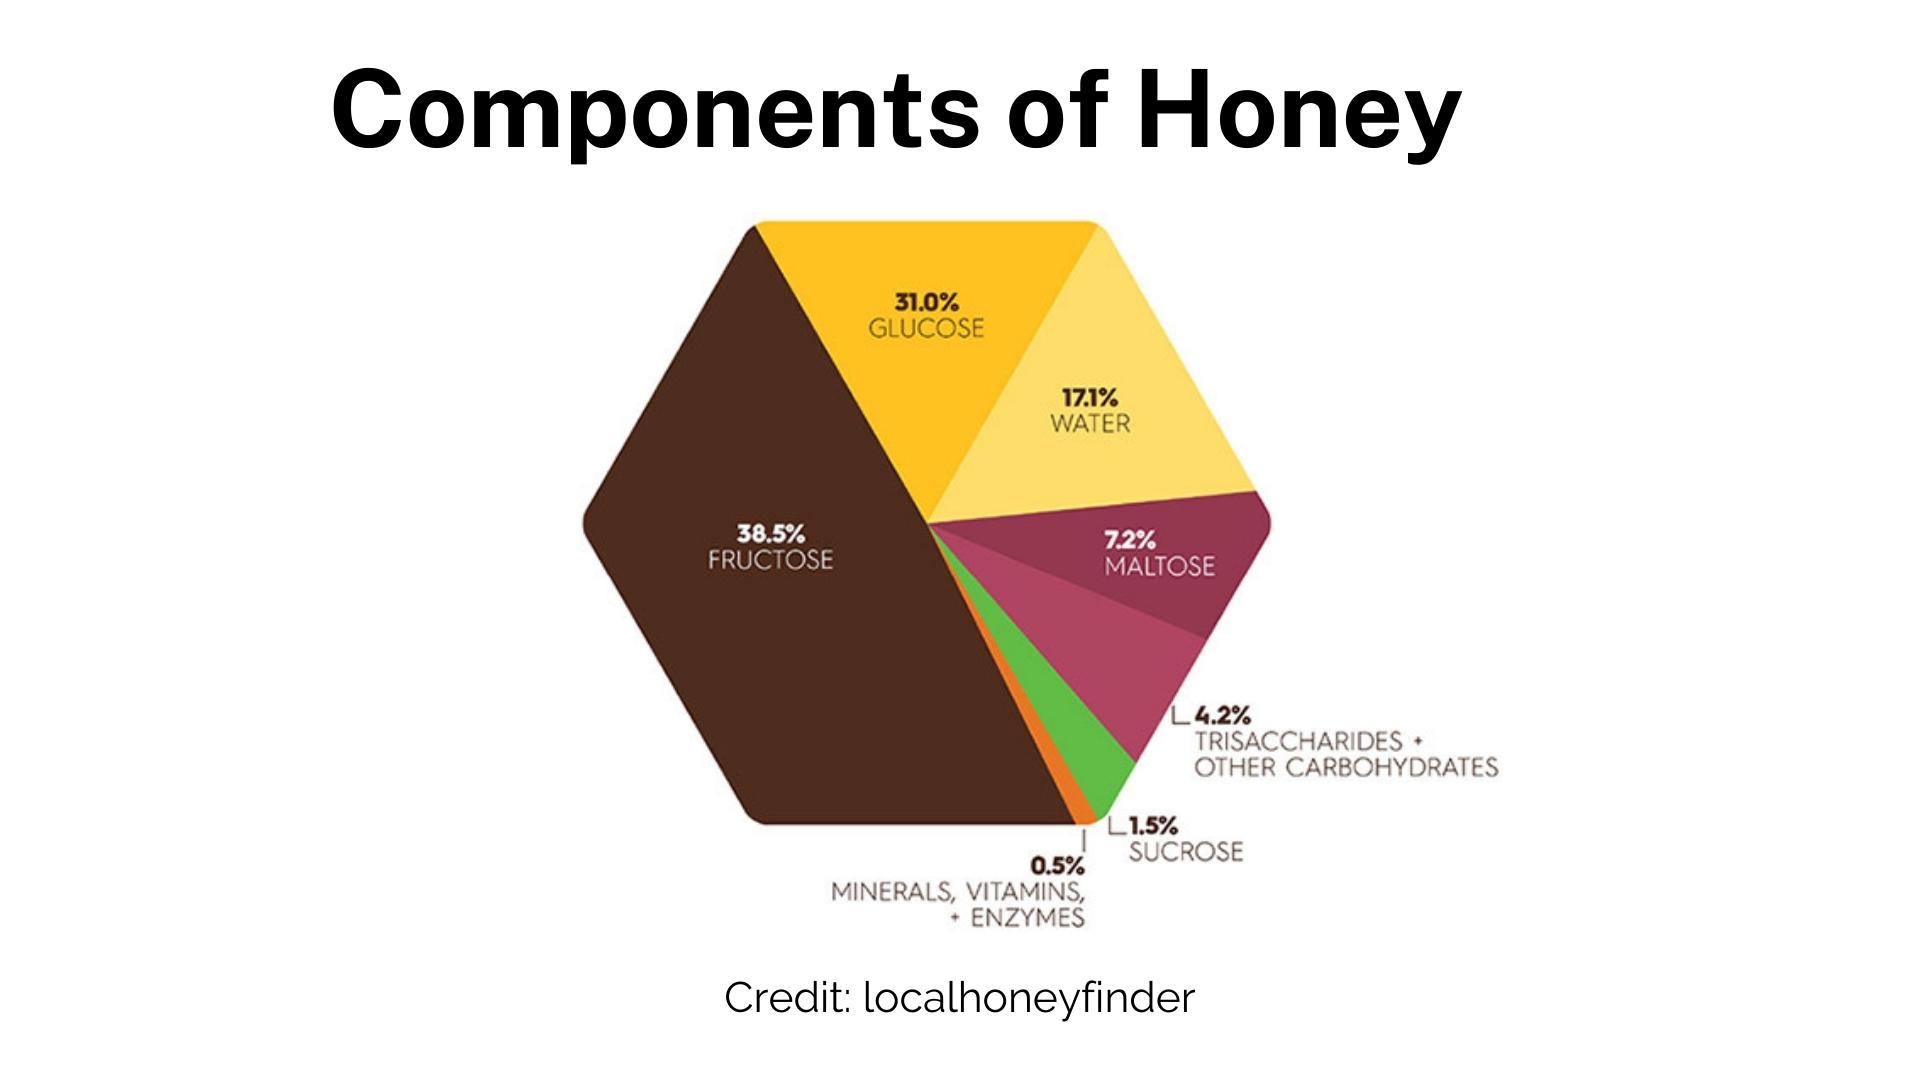 Components of Honey